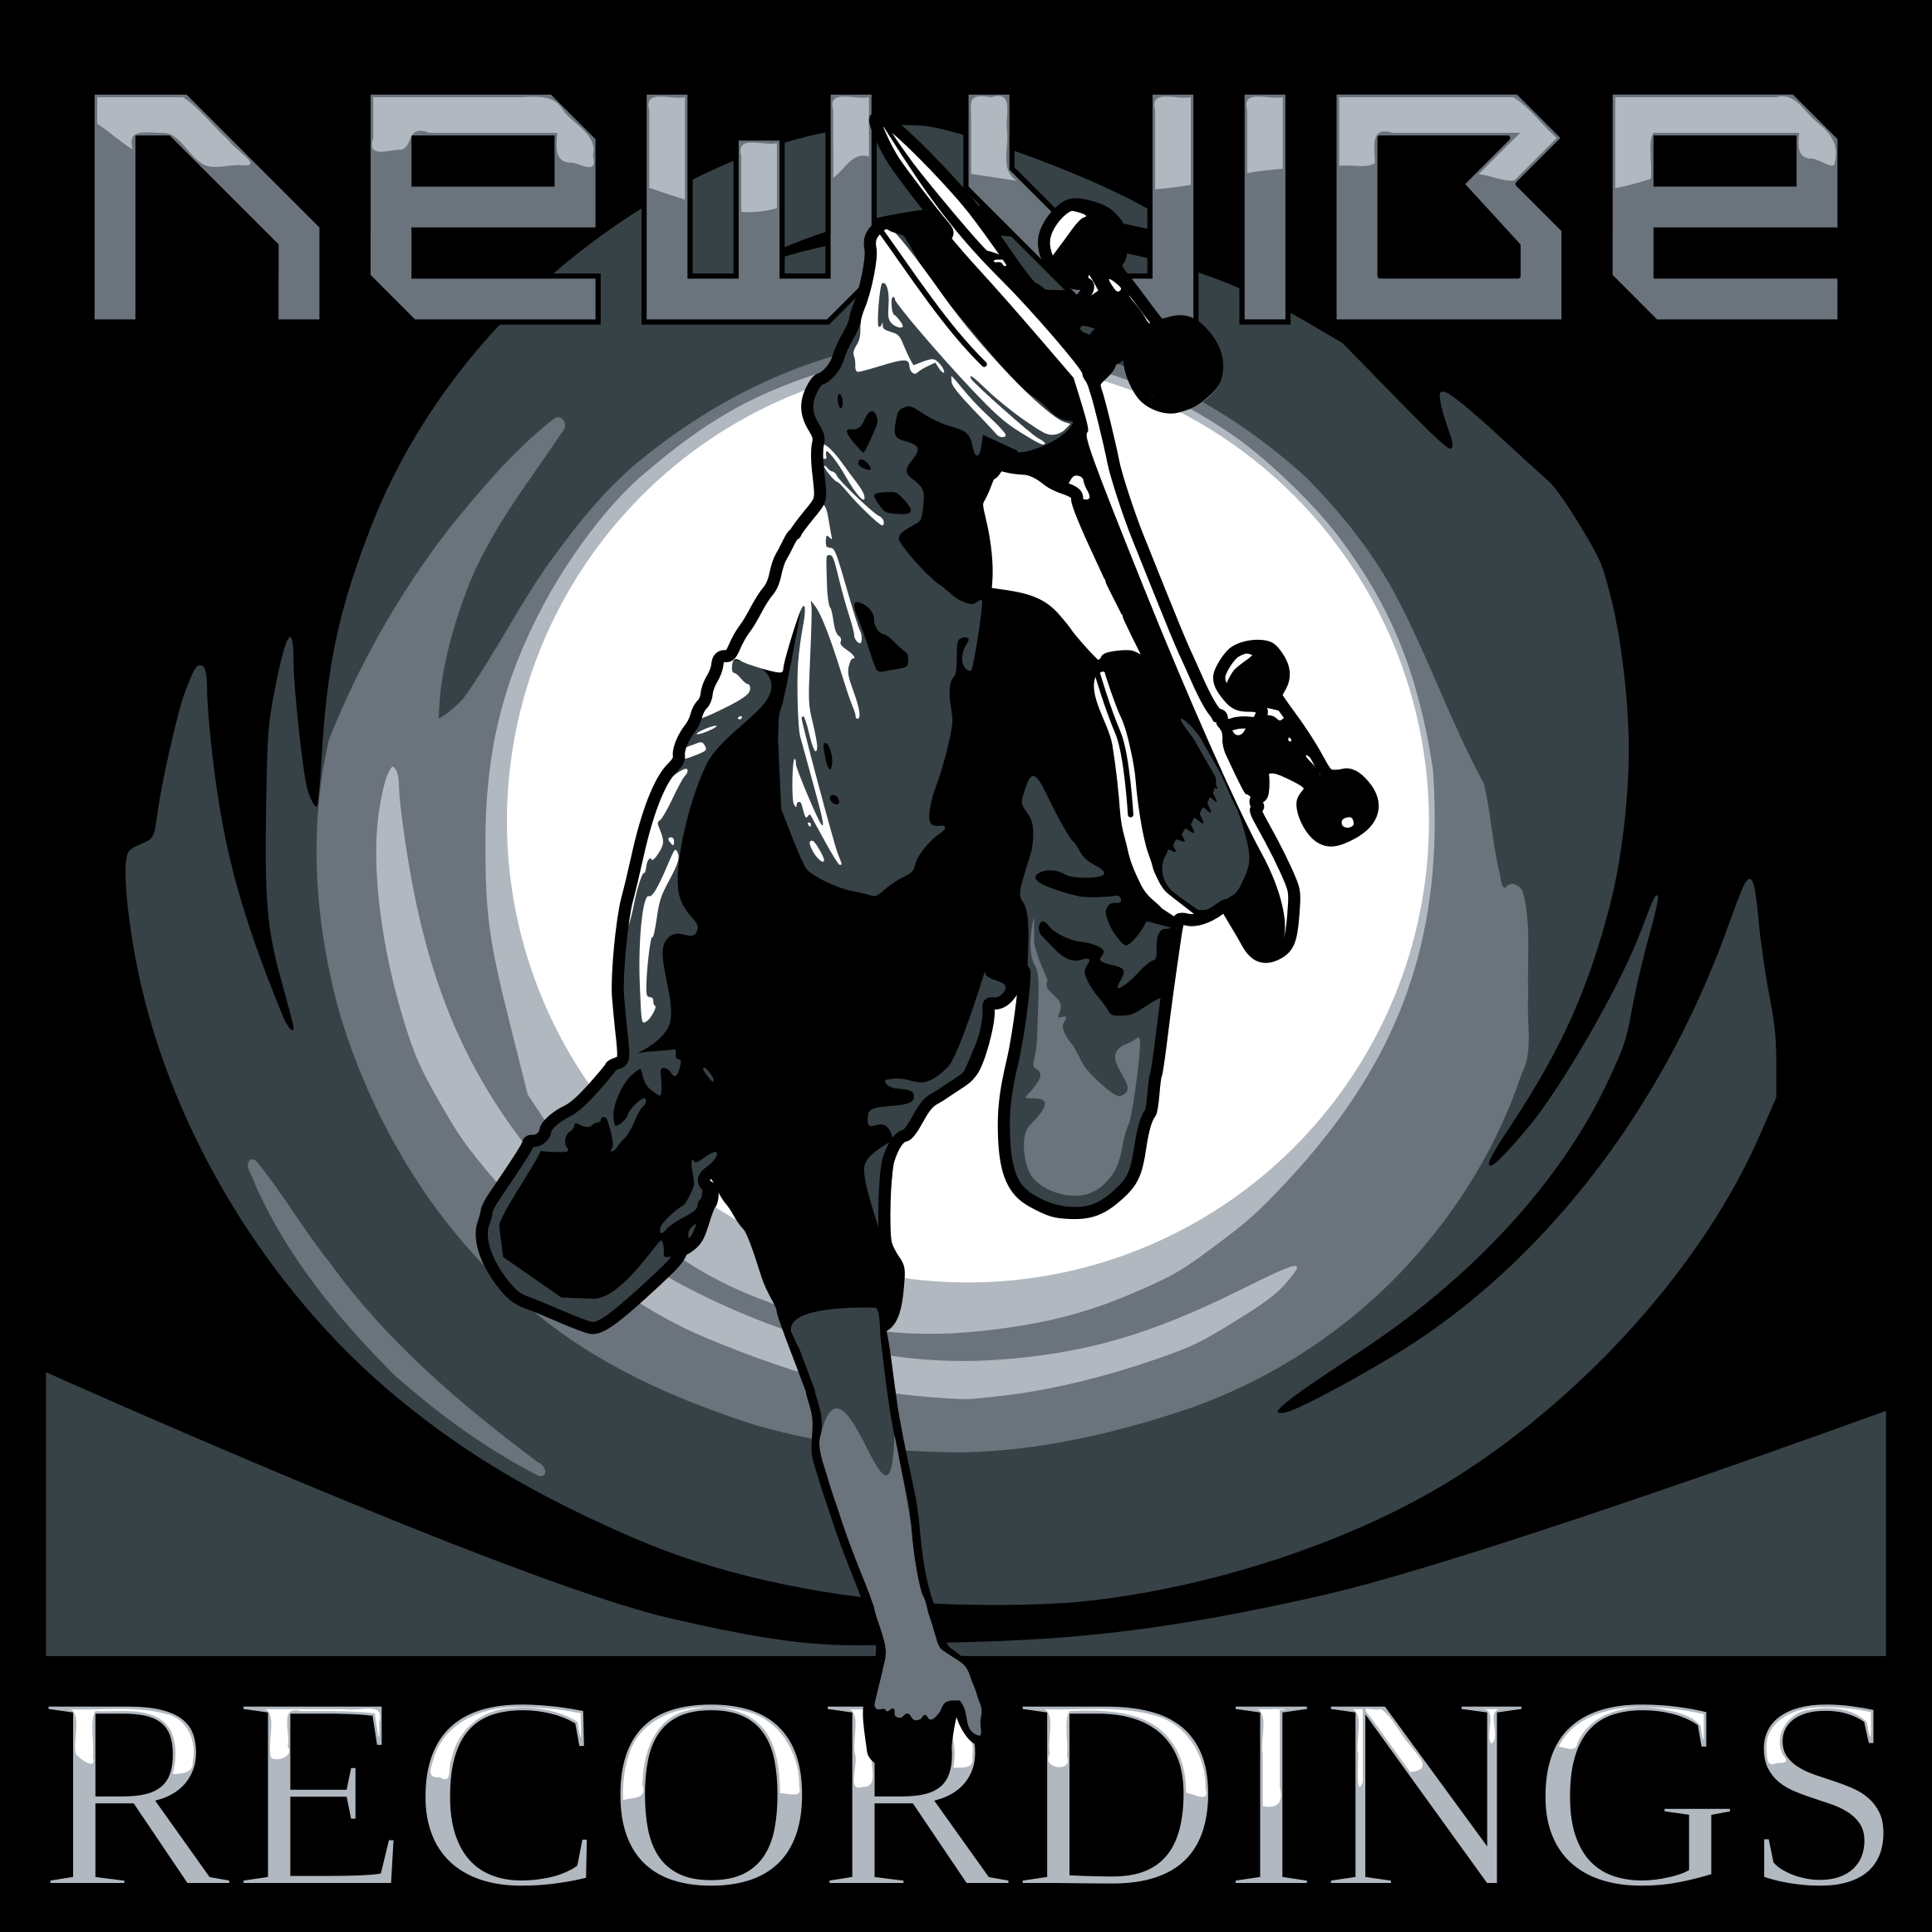 A skater motive I made for that no longer existing record label